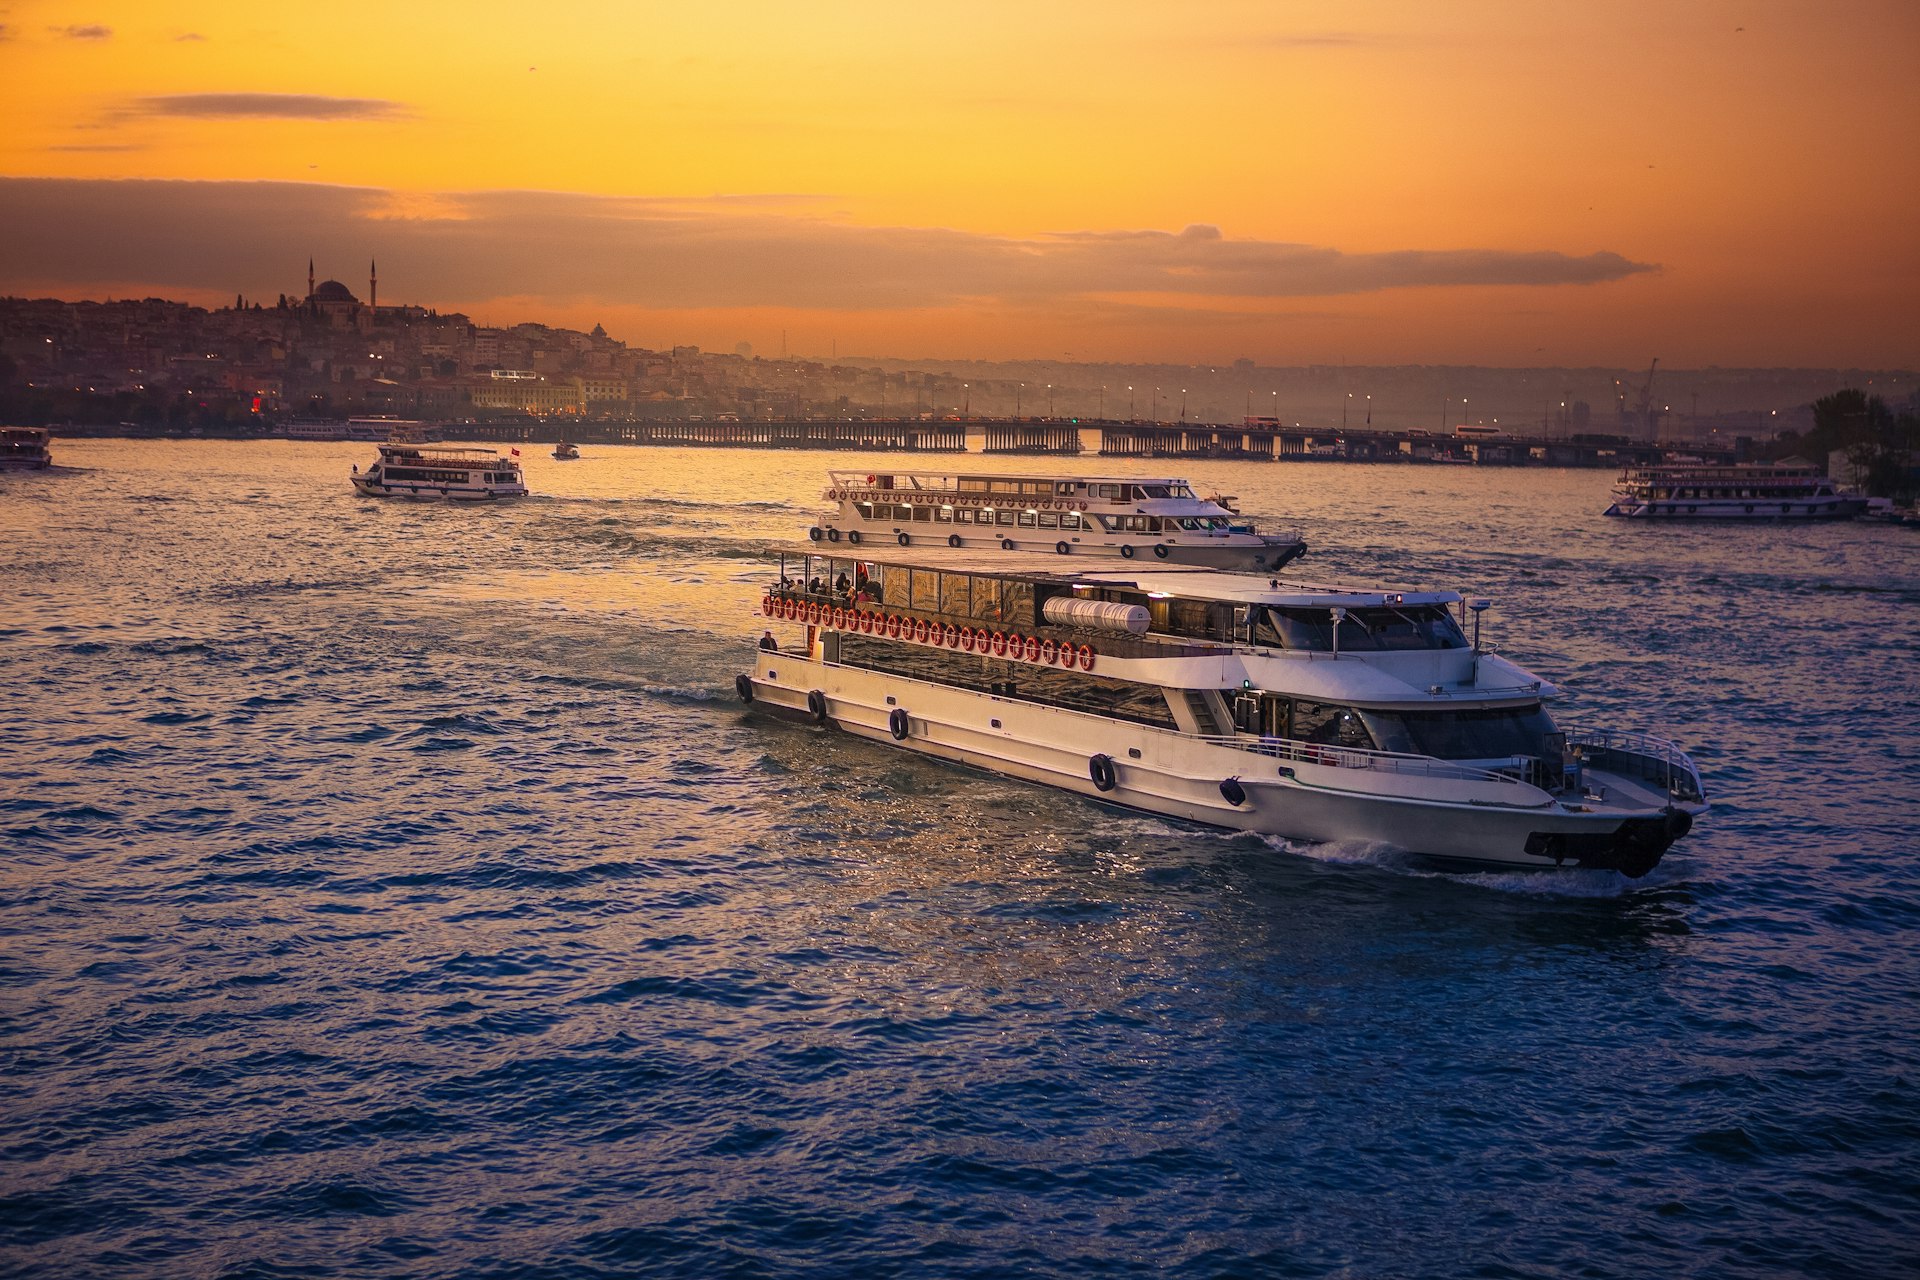 Boats motor along the Bosphorus in Turkey with the Istanbul skyline in the background